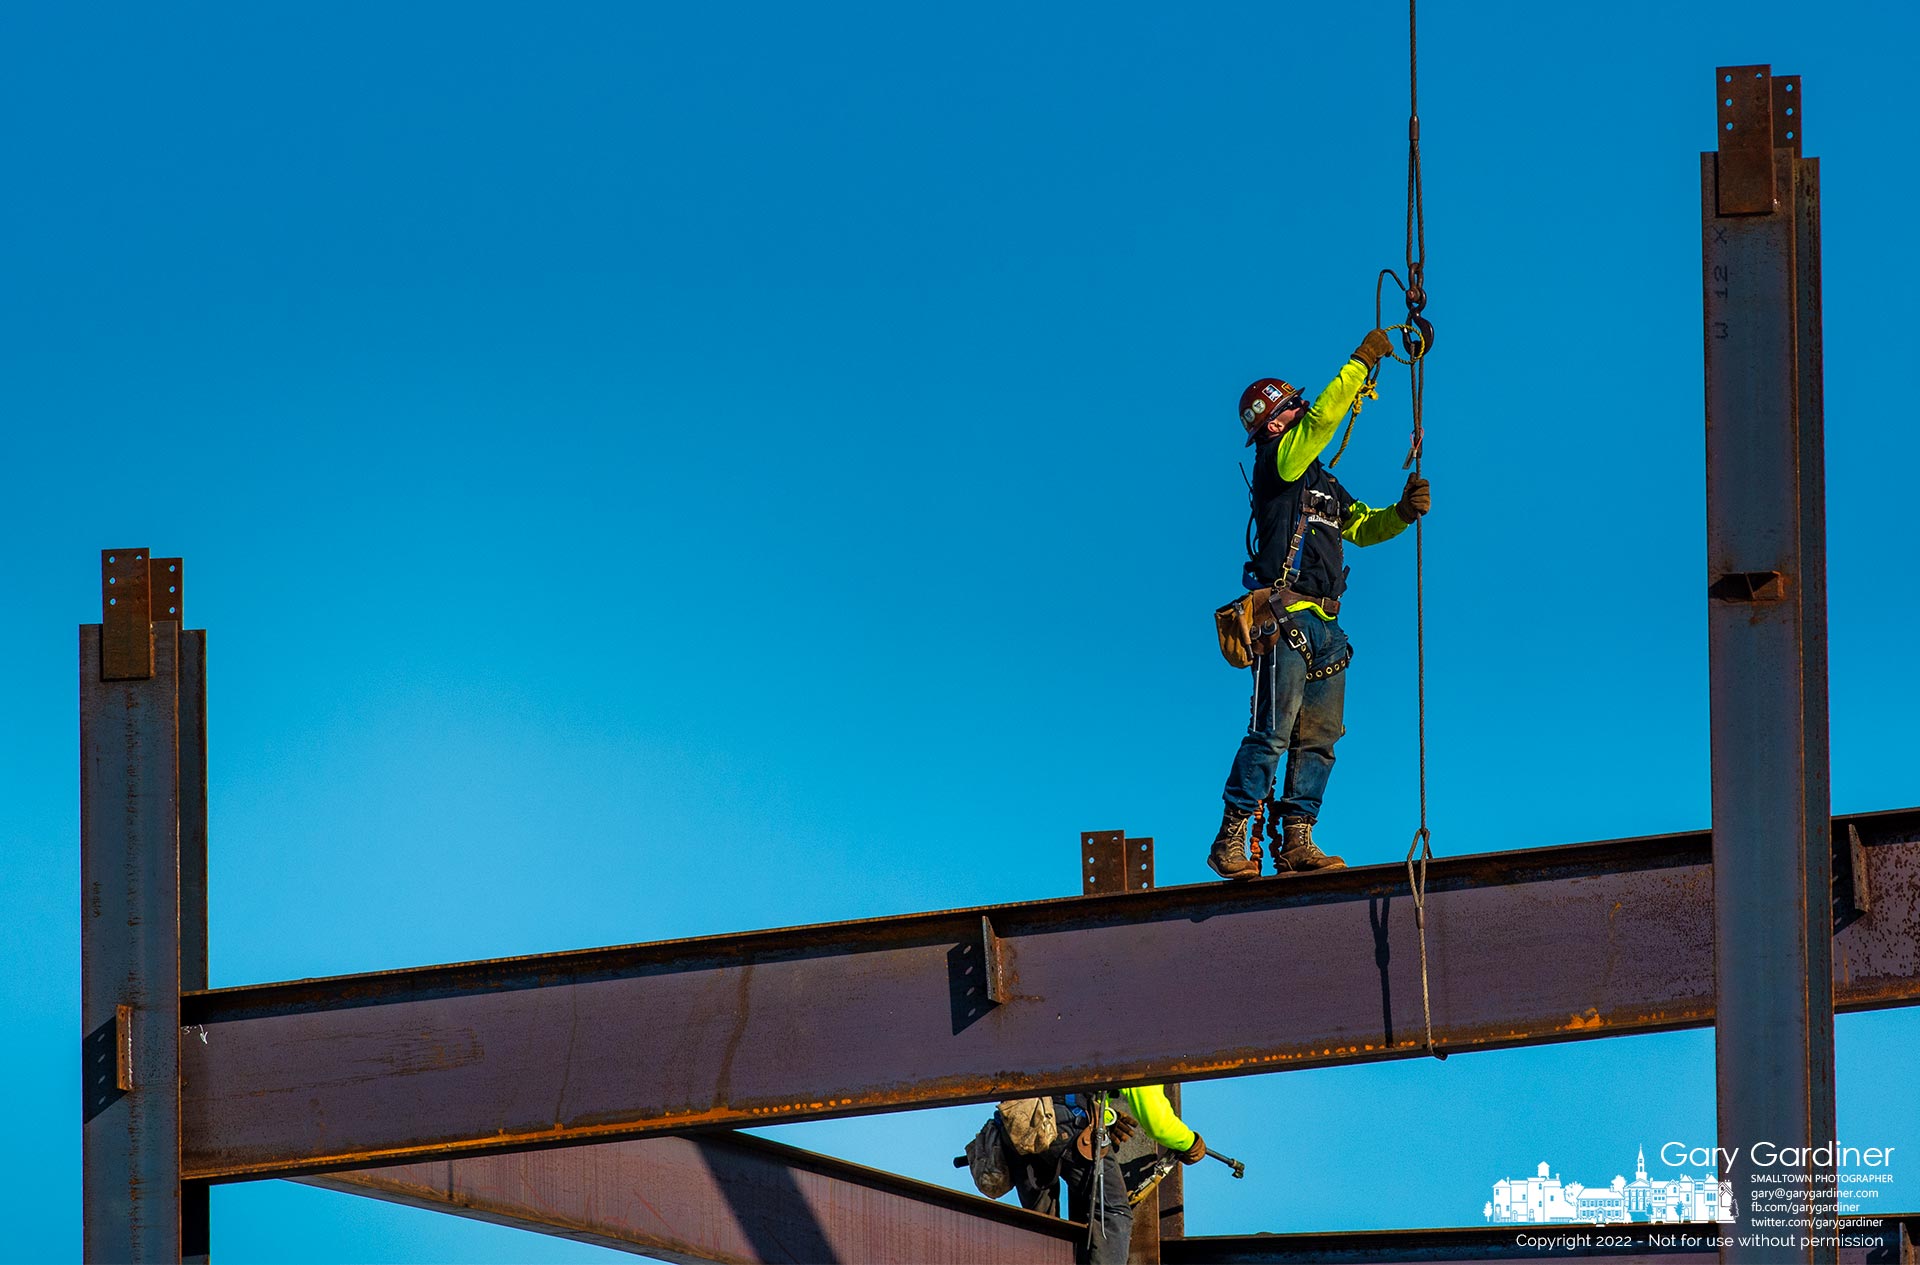 A steelworker attaches his safety gear to the hook connected to a steel beam being lowered into place for the third floor of the new four-story Orthopedic One headquarters building under construction at the corner of Polaris Parkway and Africa Road. My Final Photo for Feb. 9, 2022.